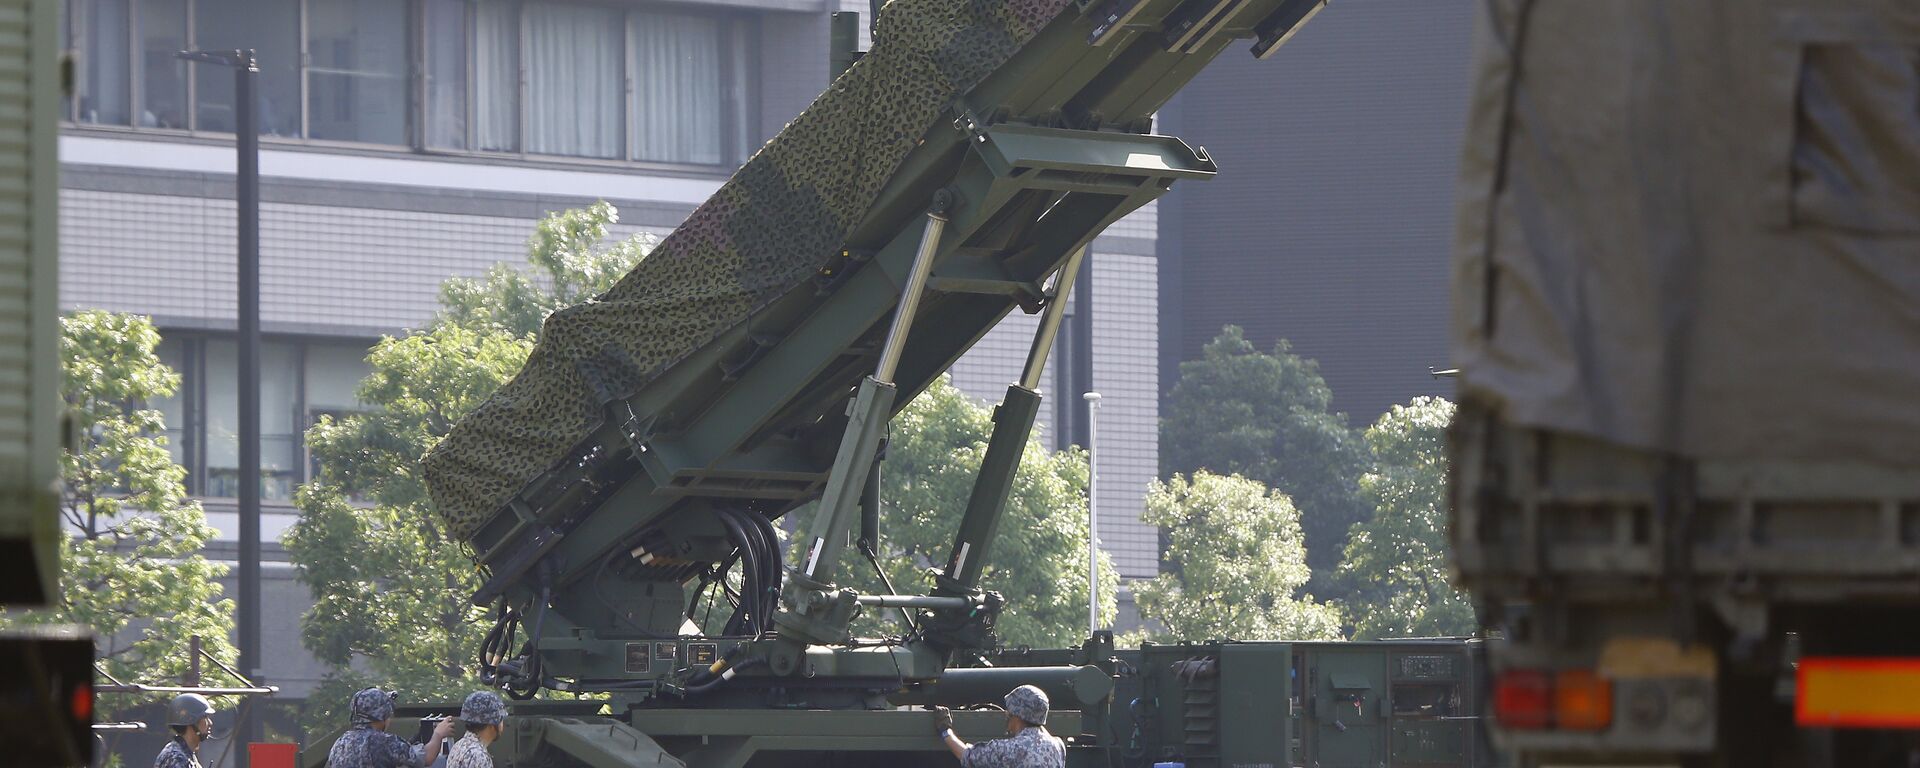 Japan Self-Defense Force members set up a PAC-3 Patriot missile unit deployed ahead of North Korea's planned rocket launch at the Defense Ministry in Tokyo, Tuesday, June 21, 2016 - Sputnik International, 1920, 29.10.2022